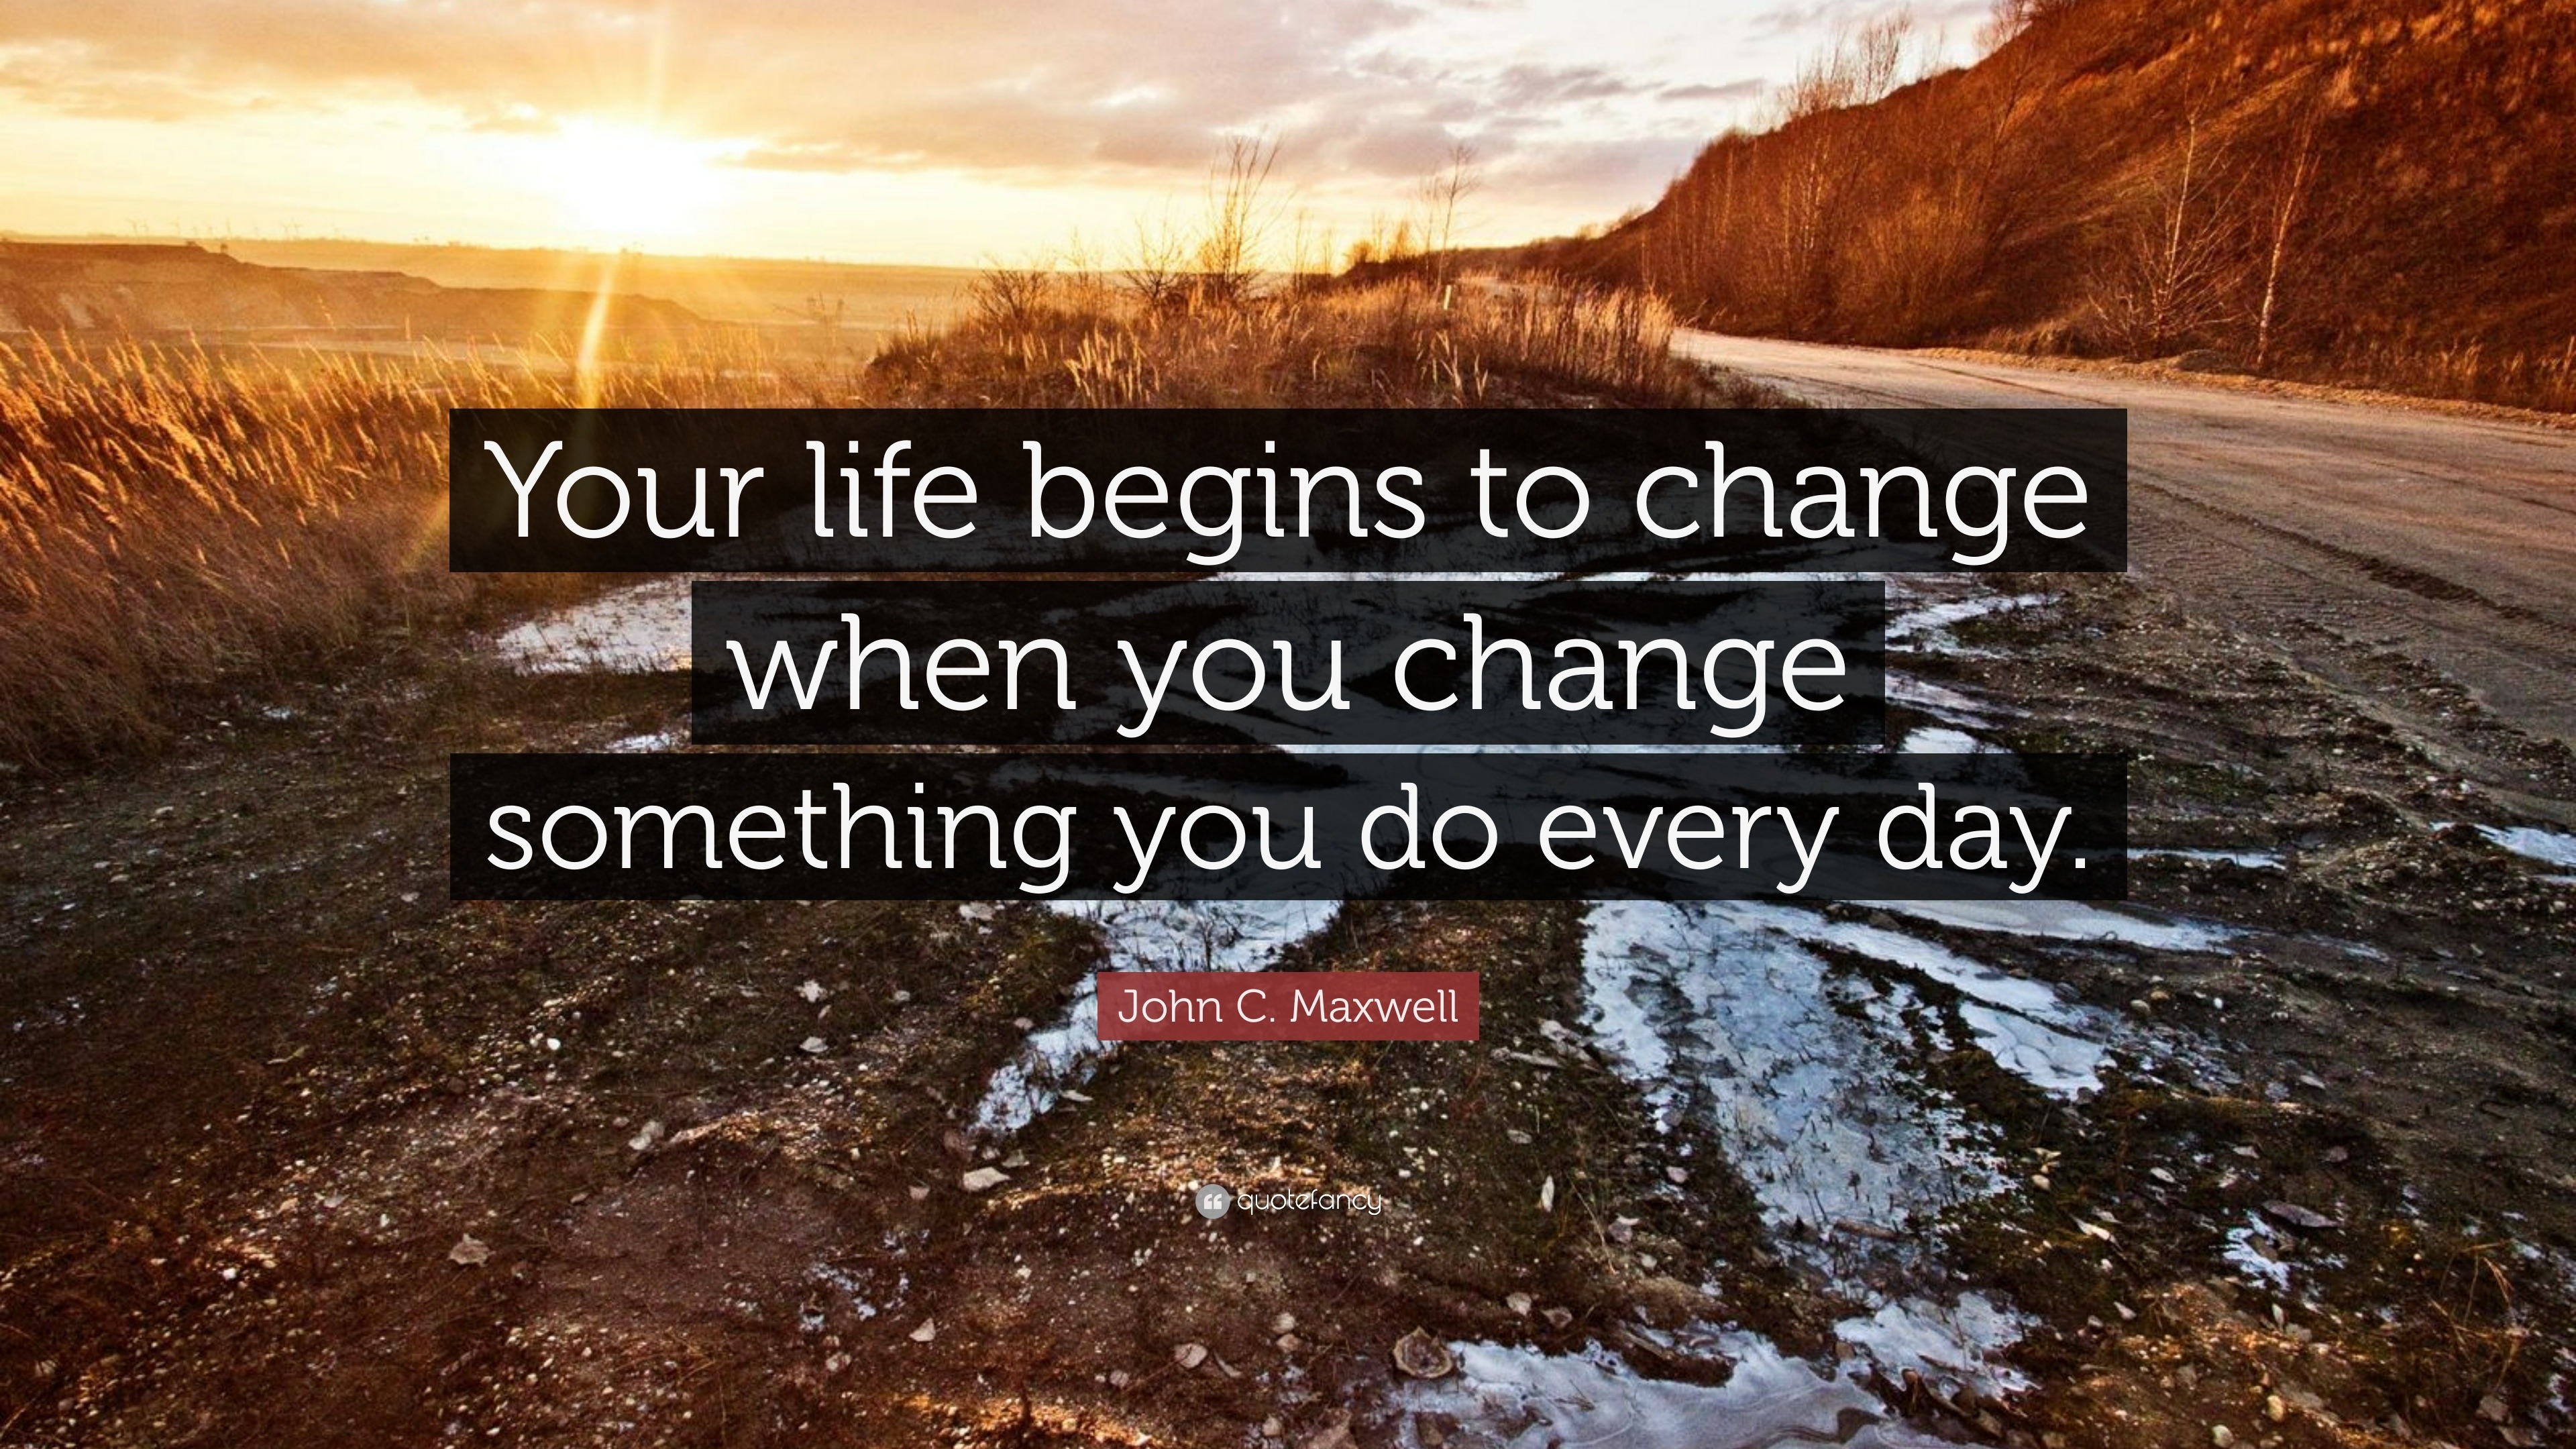 John C. Maxwell Quote: “Your life begins to change when you change ...